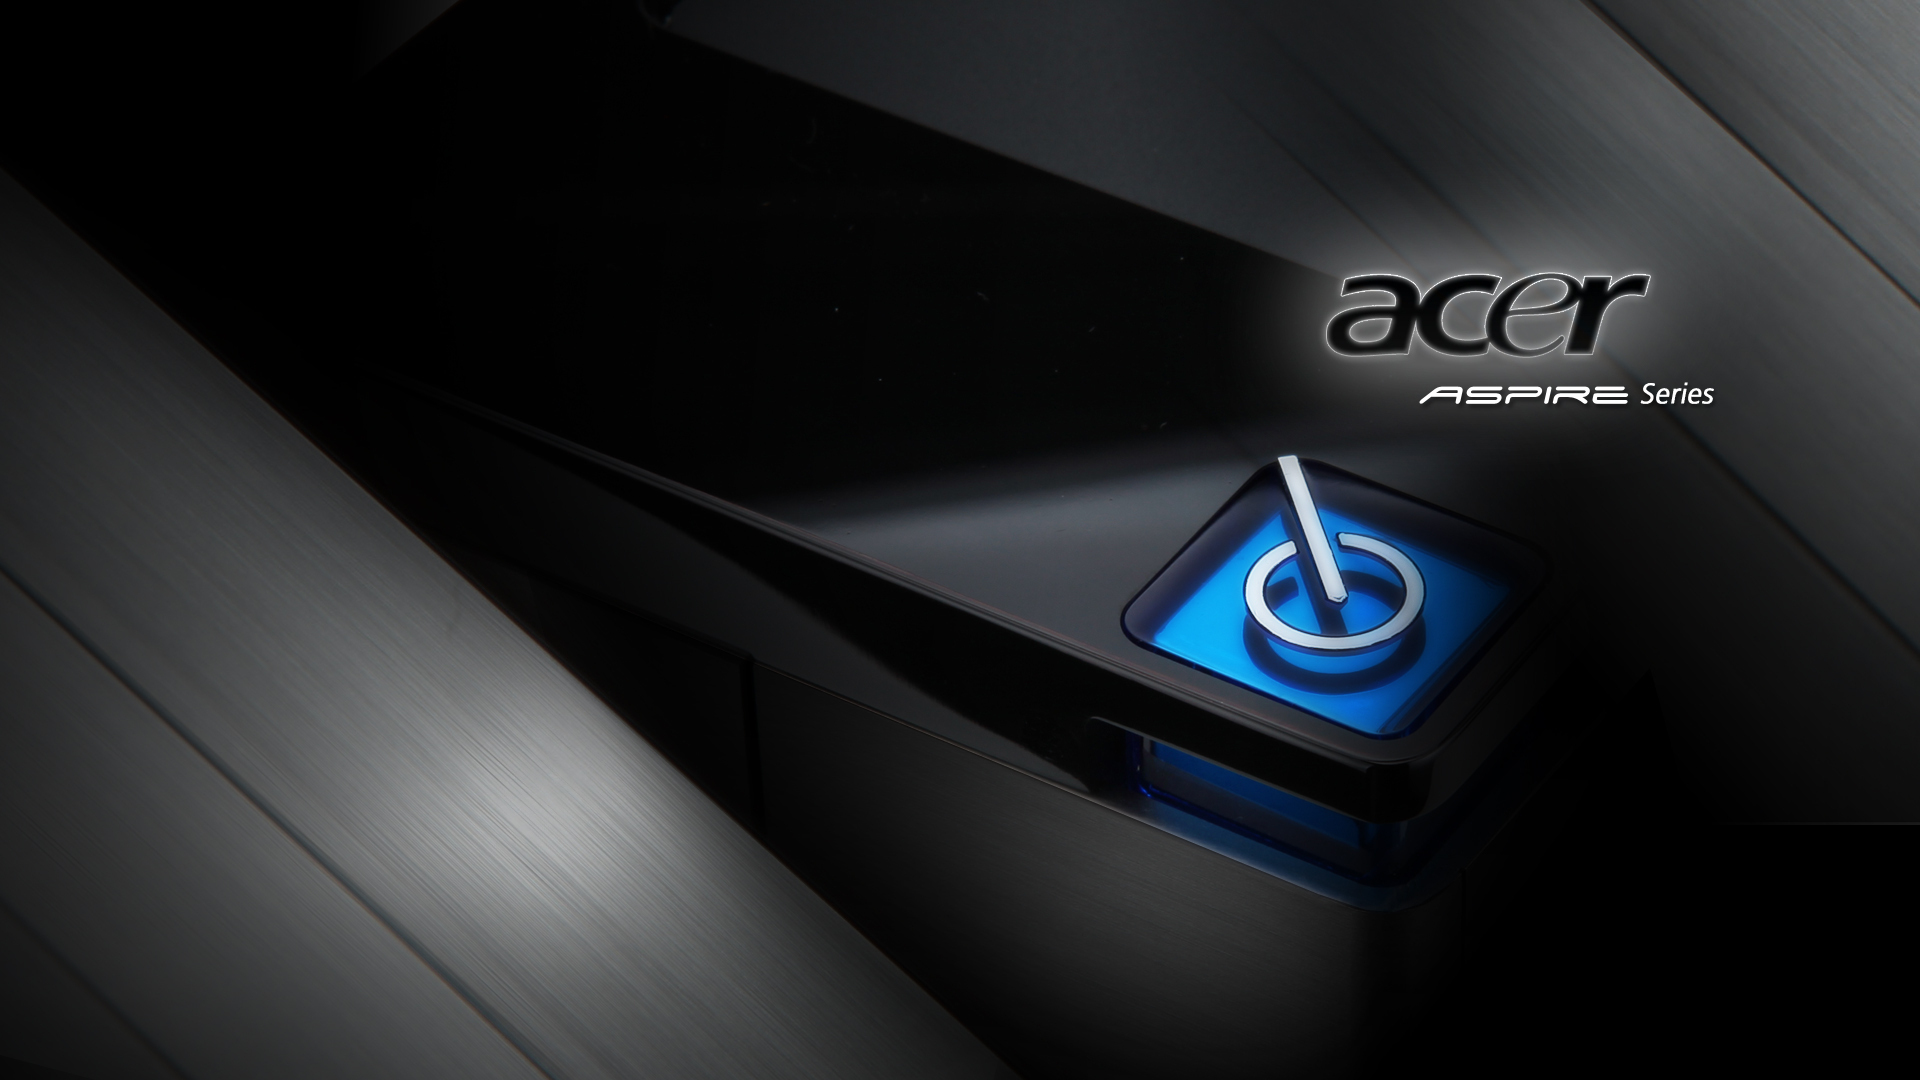 Acer Aspire Desktop Wallpaper PC Android iPhone and iPad Wallpapers